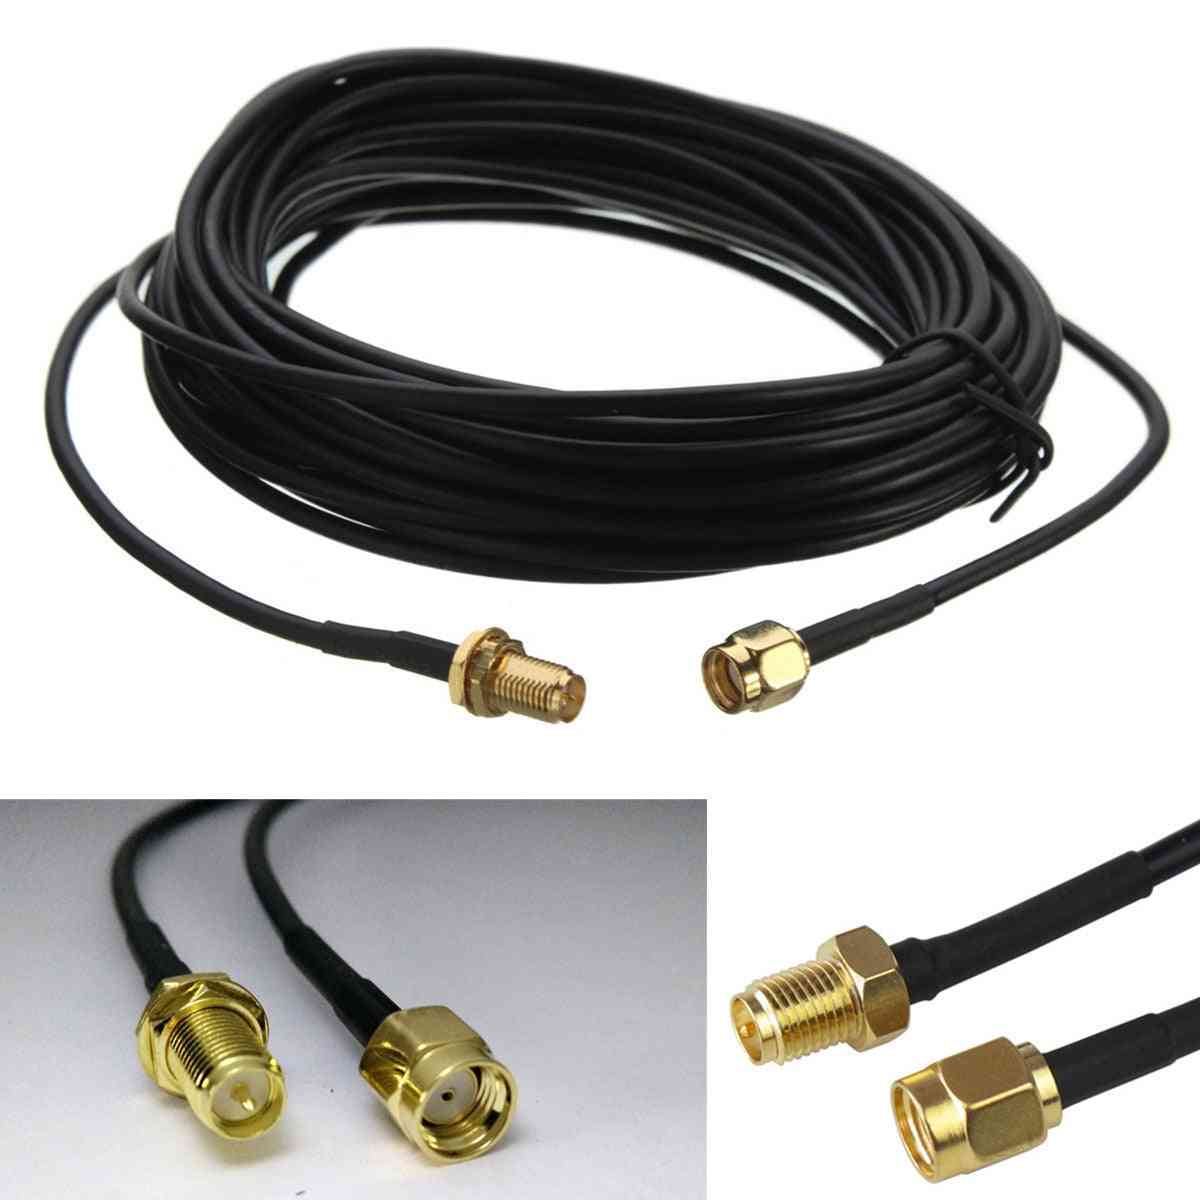 Pure Copper Gold Plated Male To Female Antenna - Rg174 Rp-sma 1m 5m 6m 9m Extension Cable